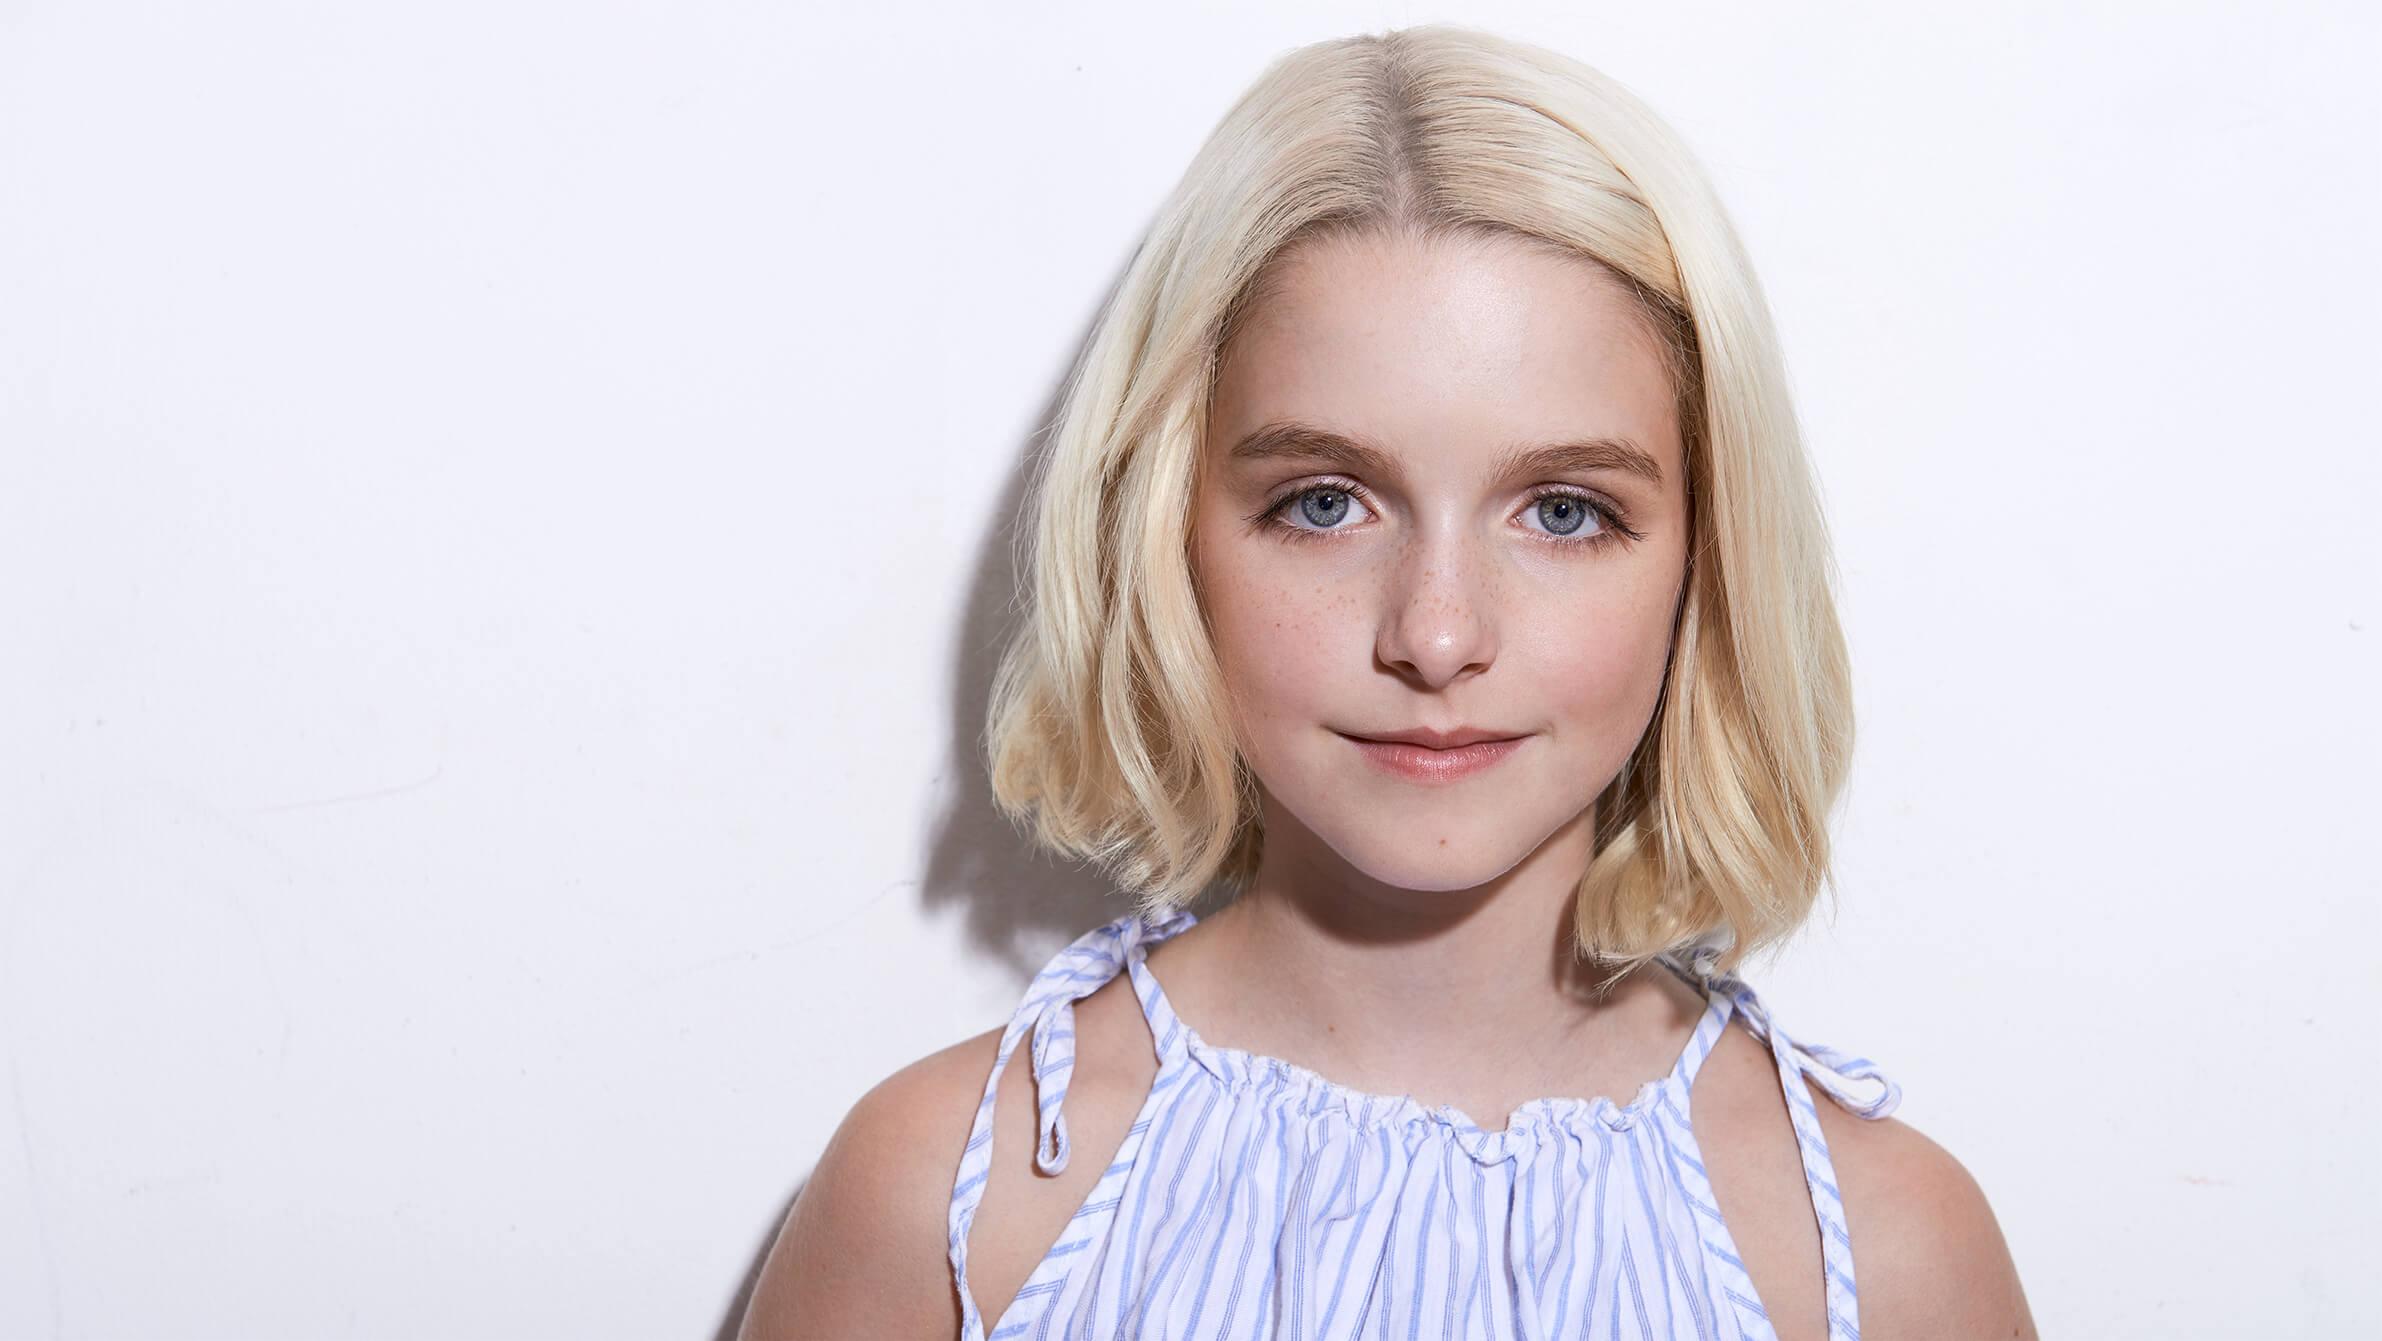 37 Facts about Mckenna Grace - Facts.net